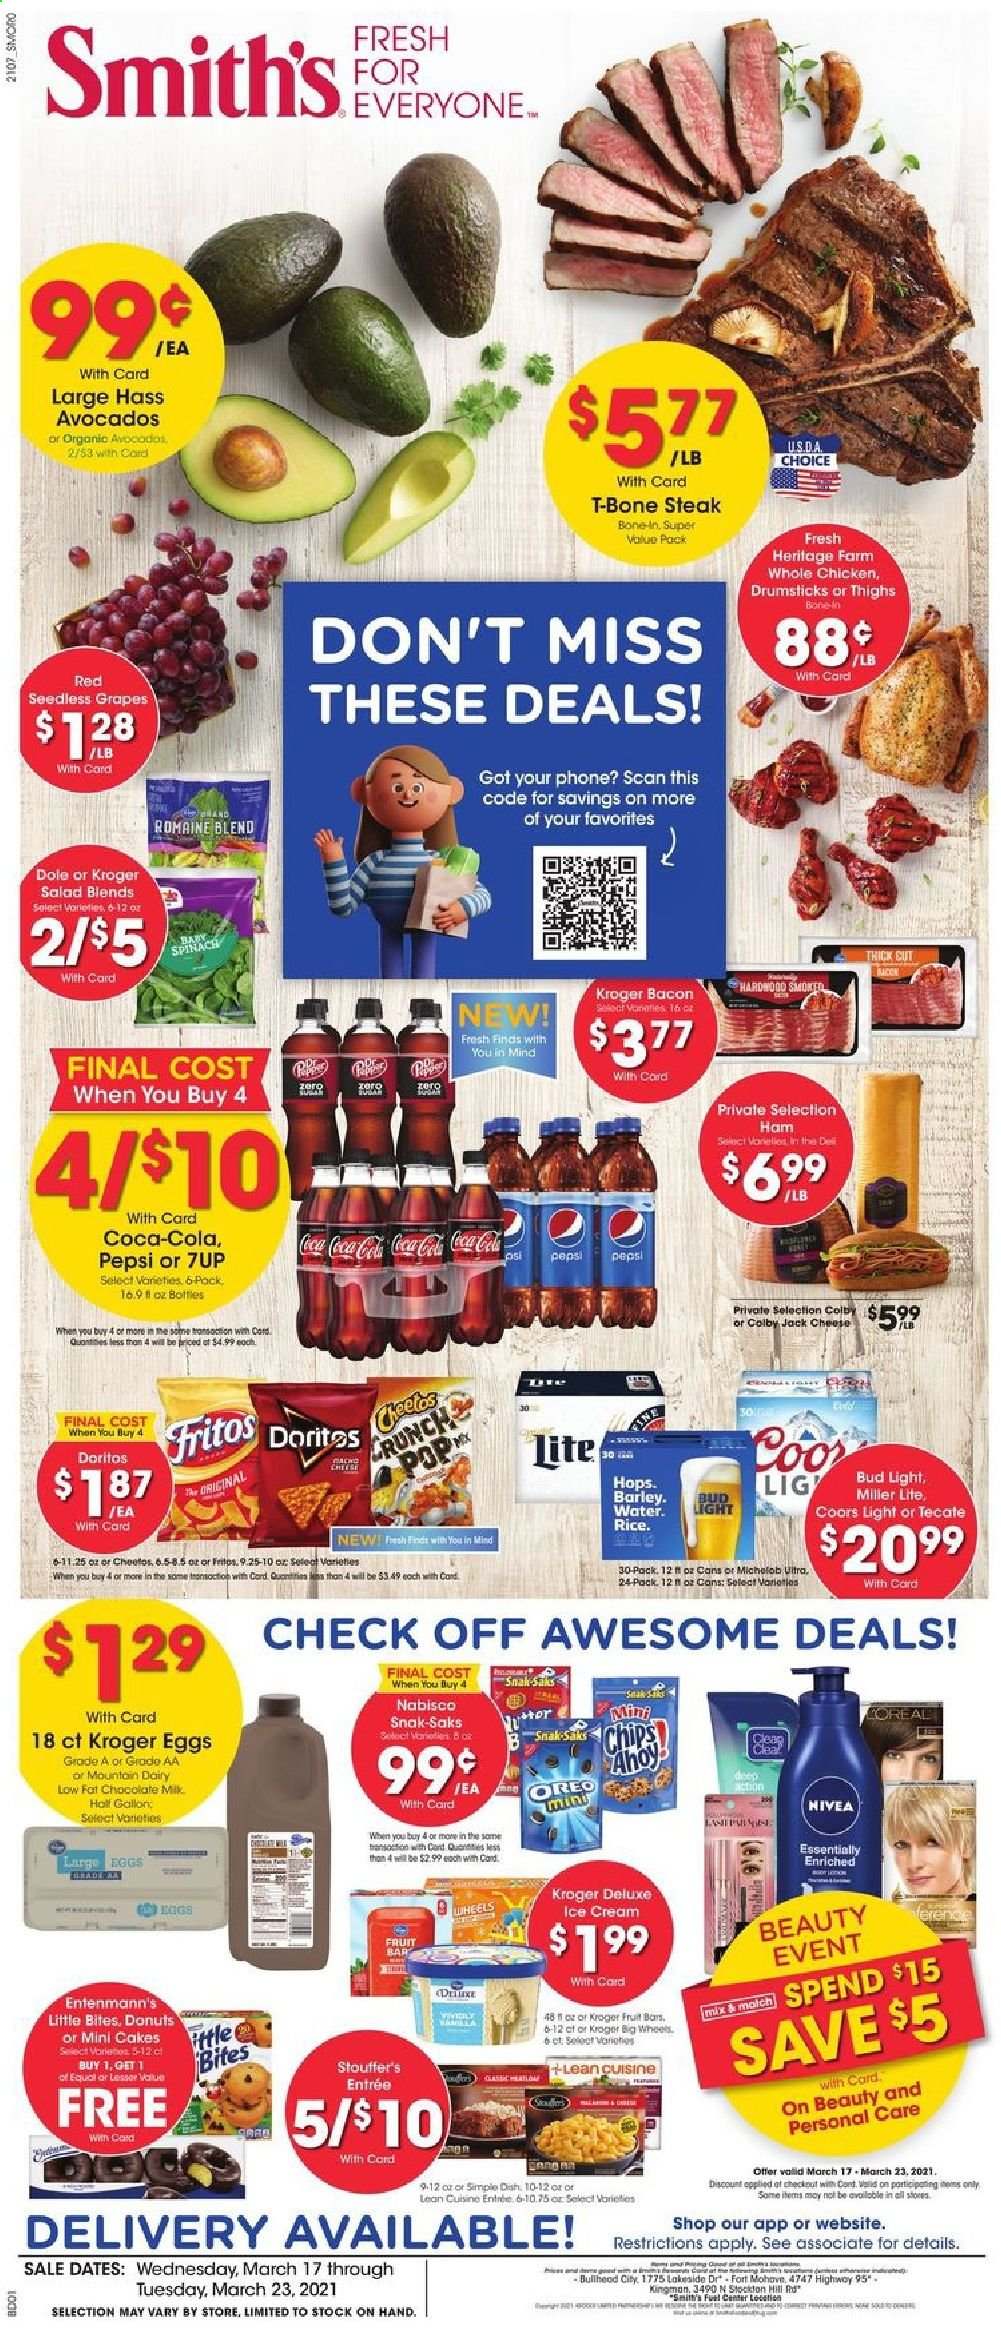 thumbnail - Smith's Flyer - 03/17/2021 - 03/23/2021 - Sales products - seedless grapes, Dole, cake, donut, Entenmann's, Little Bites, salad, Lean Cuisine, bacon, ham, Colby cheese, Oreo, milk, large eggs, ice cream, spinach, Stouffer's, chocolate, Doritos, Cheetos, chips, Smith's, Fritos, Coca-Cola, Pepsi, 7UP, beer, Miller Lite, Coors, Michelob, Bud Light, whole chicken, beef meat, t-bone steak, steak, Nivea. Page 1.